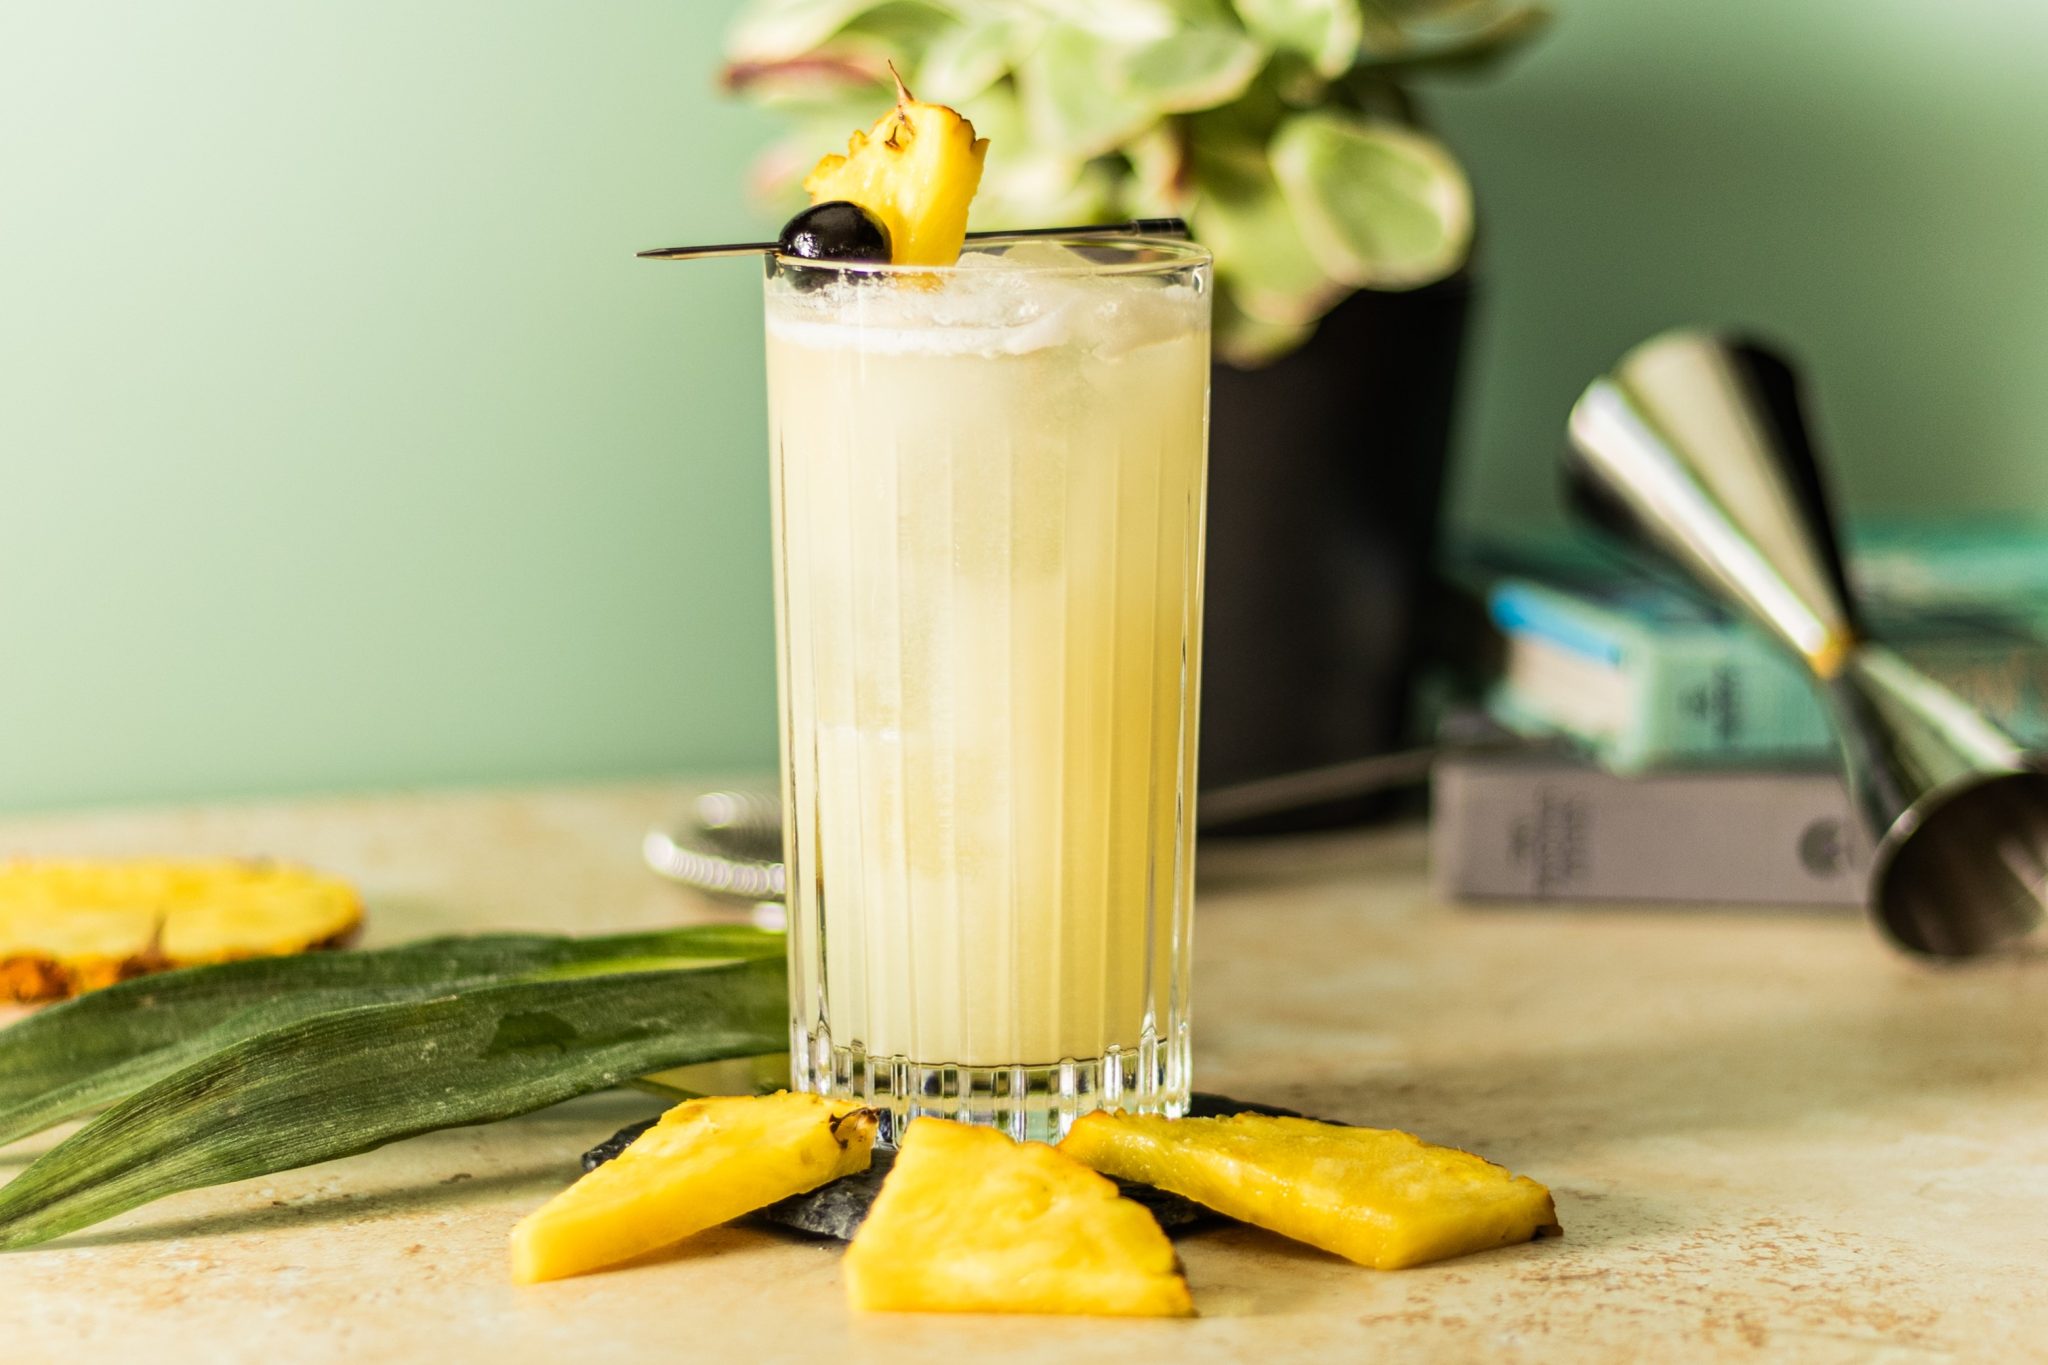 A side shot of Virgin Piña Colada Cocktail in highball glass on a beige table surrounded by three pineapple slices, some plant leaves, two books and a jigger, in front of a light green wall.